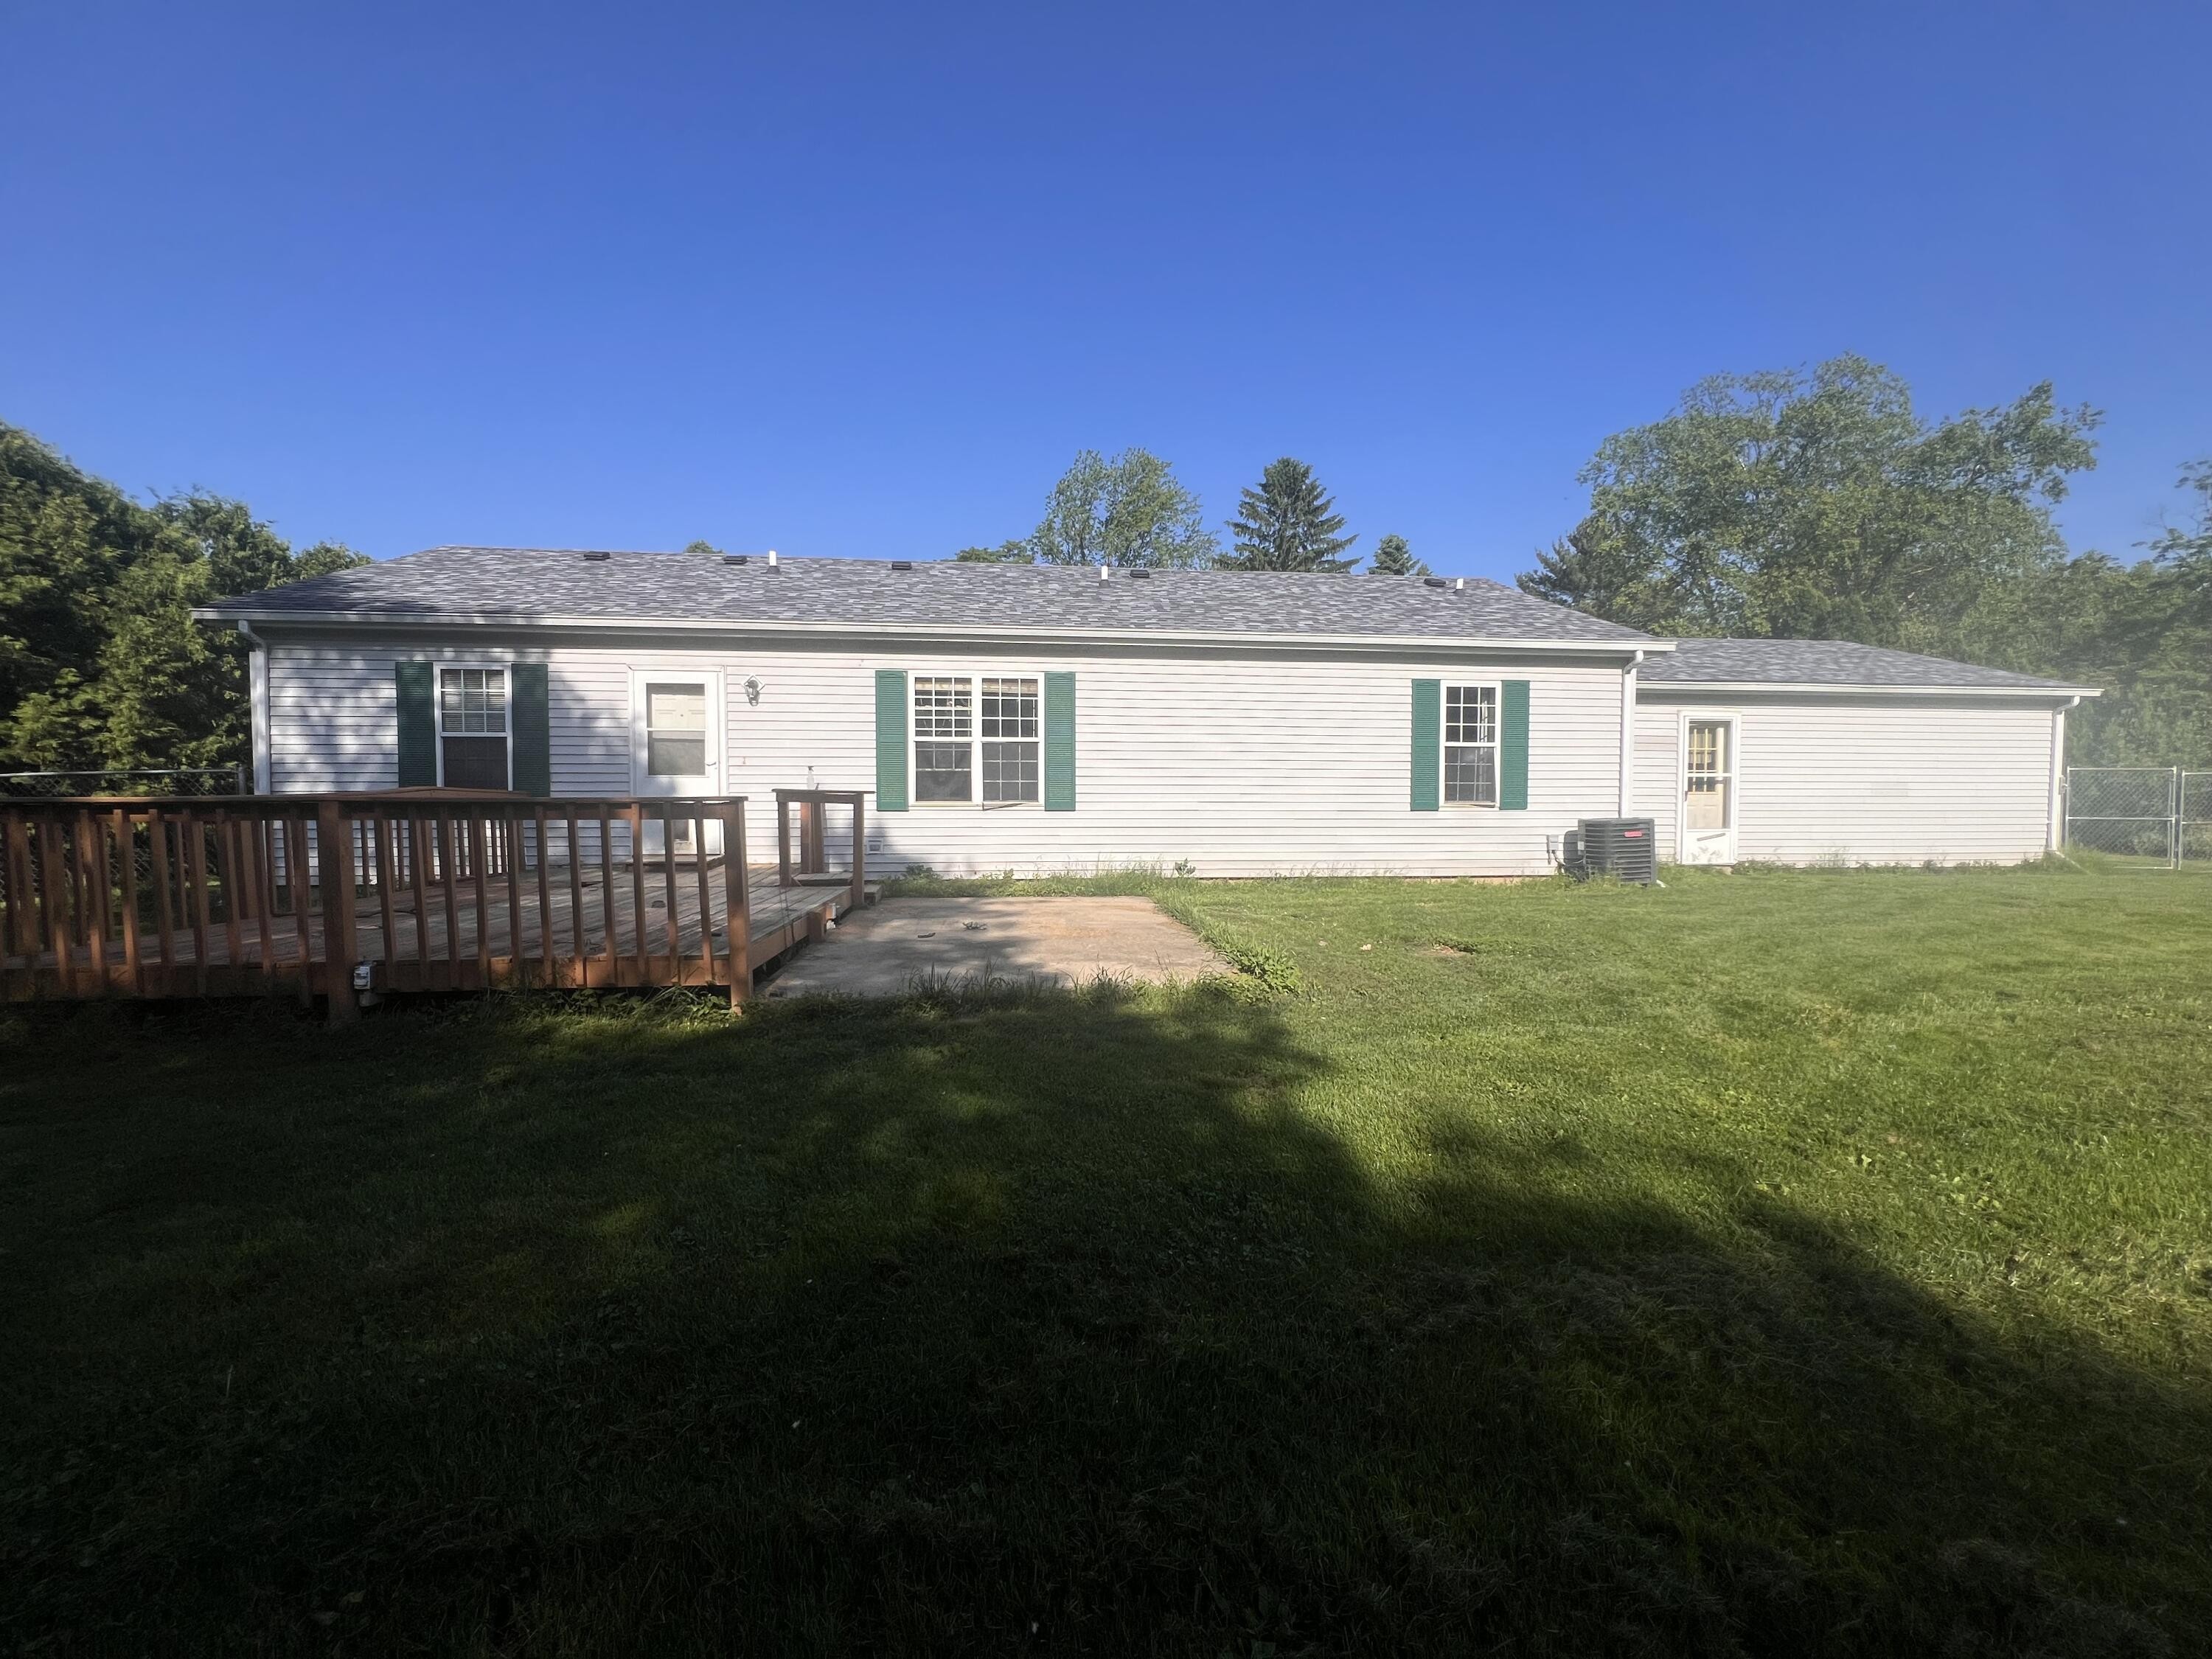 2. 3155 County Line Road